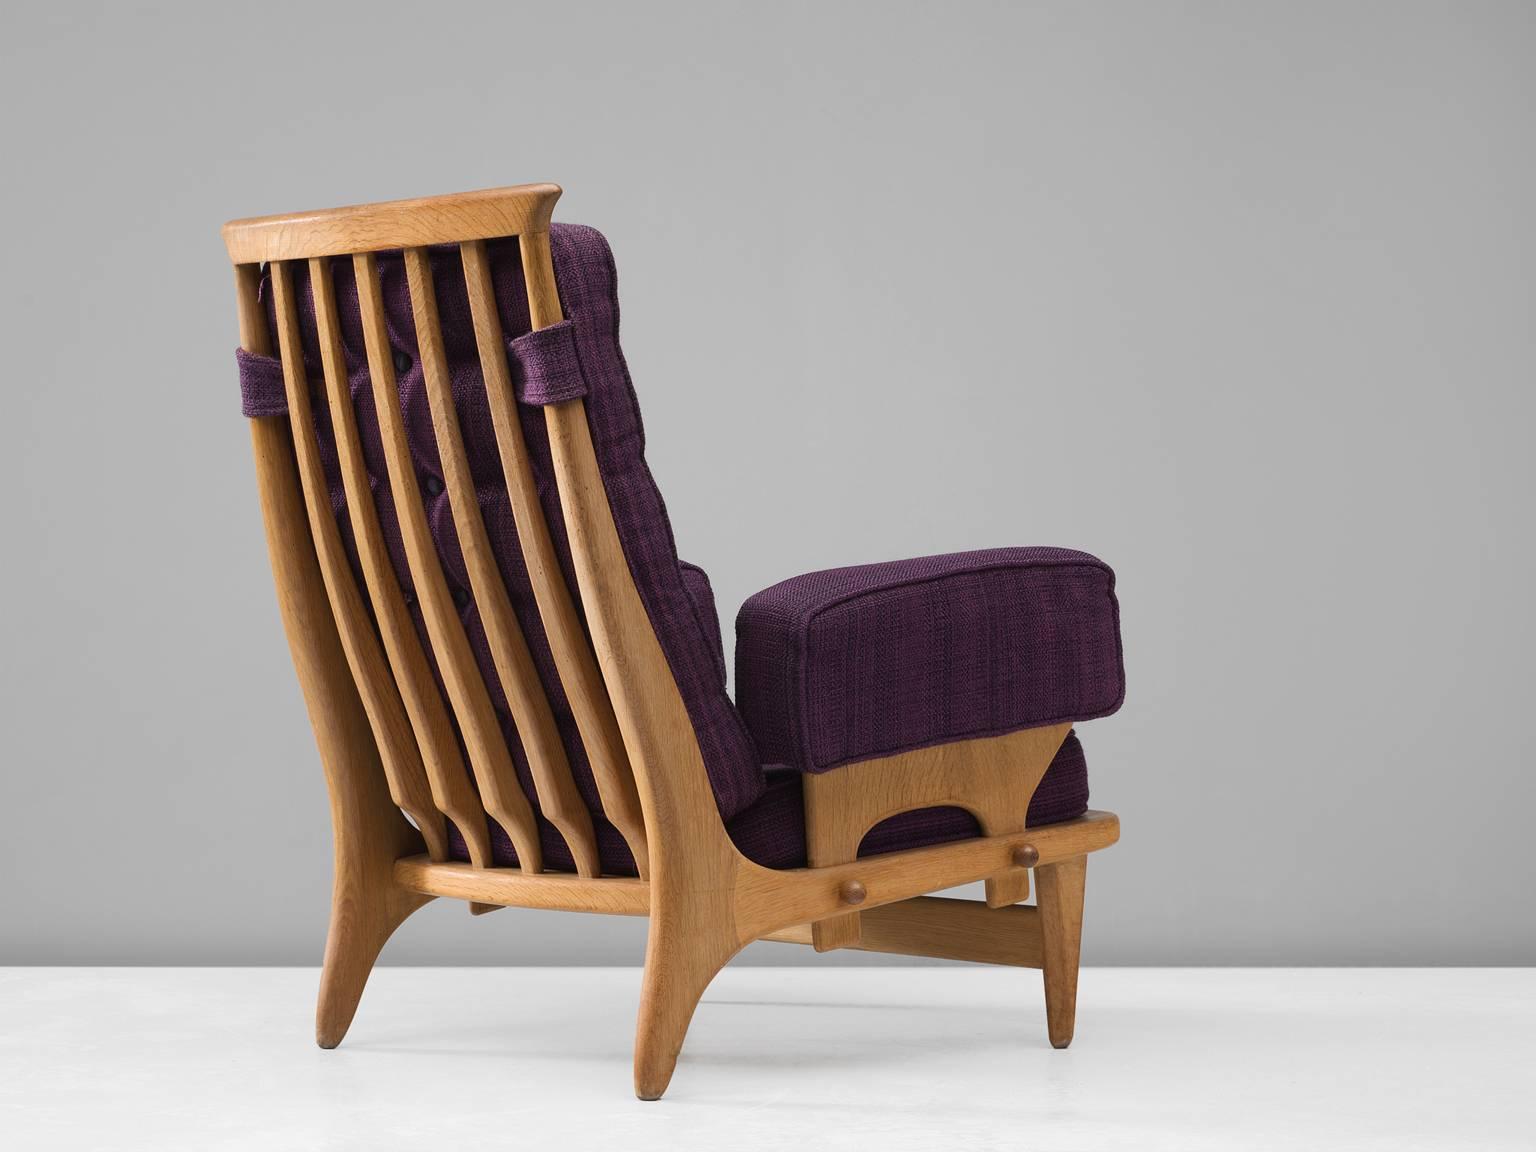 Guillerme & Chambron, easy chair in purple fabric and oak, 1940s, France.

This high back lounge chair in solid oak with the typical characteristic decorative details at the back and capricious forms of the legs. This distinctive chair in